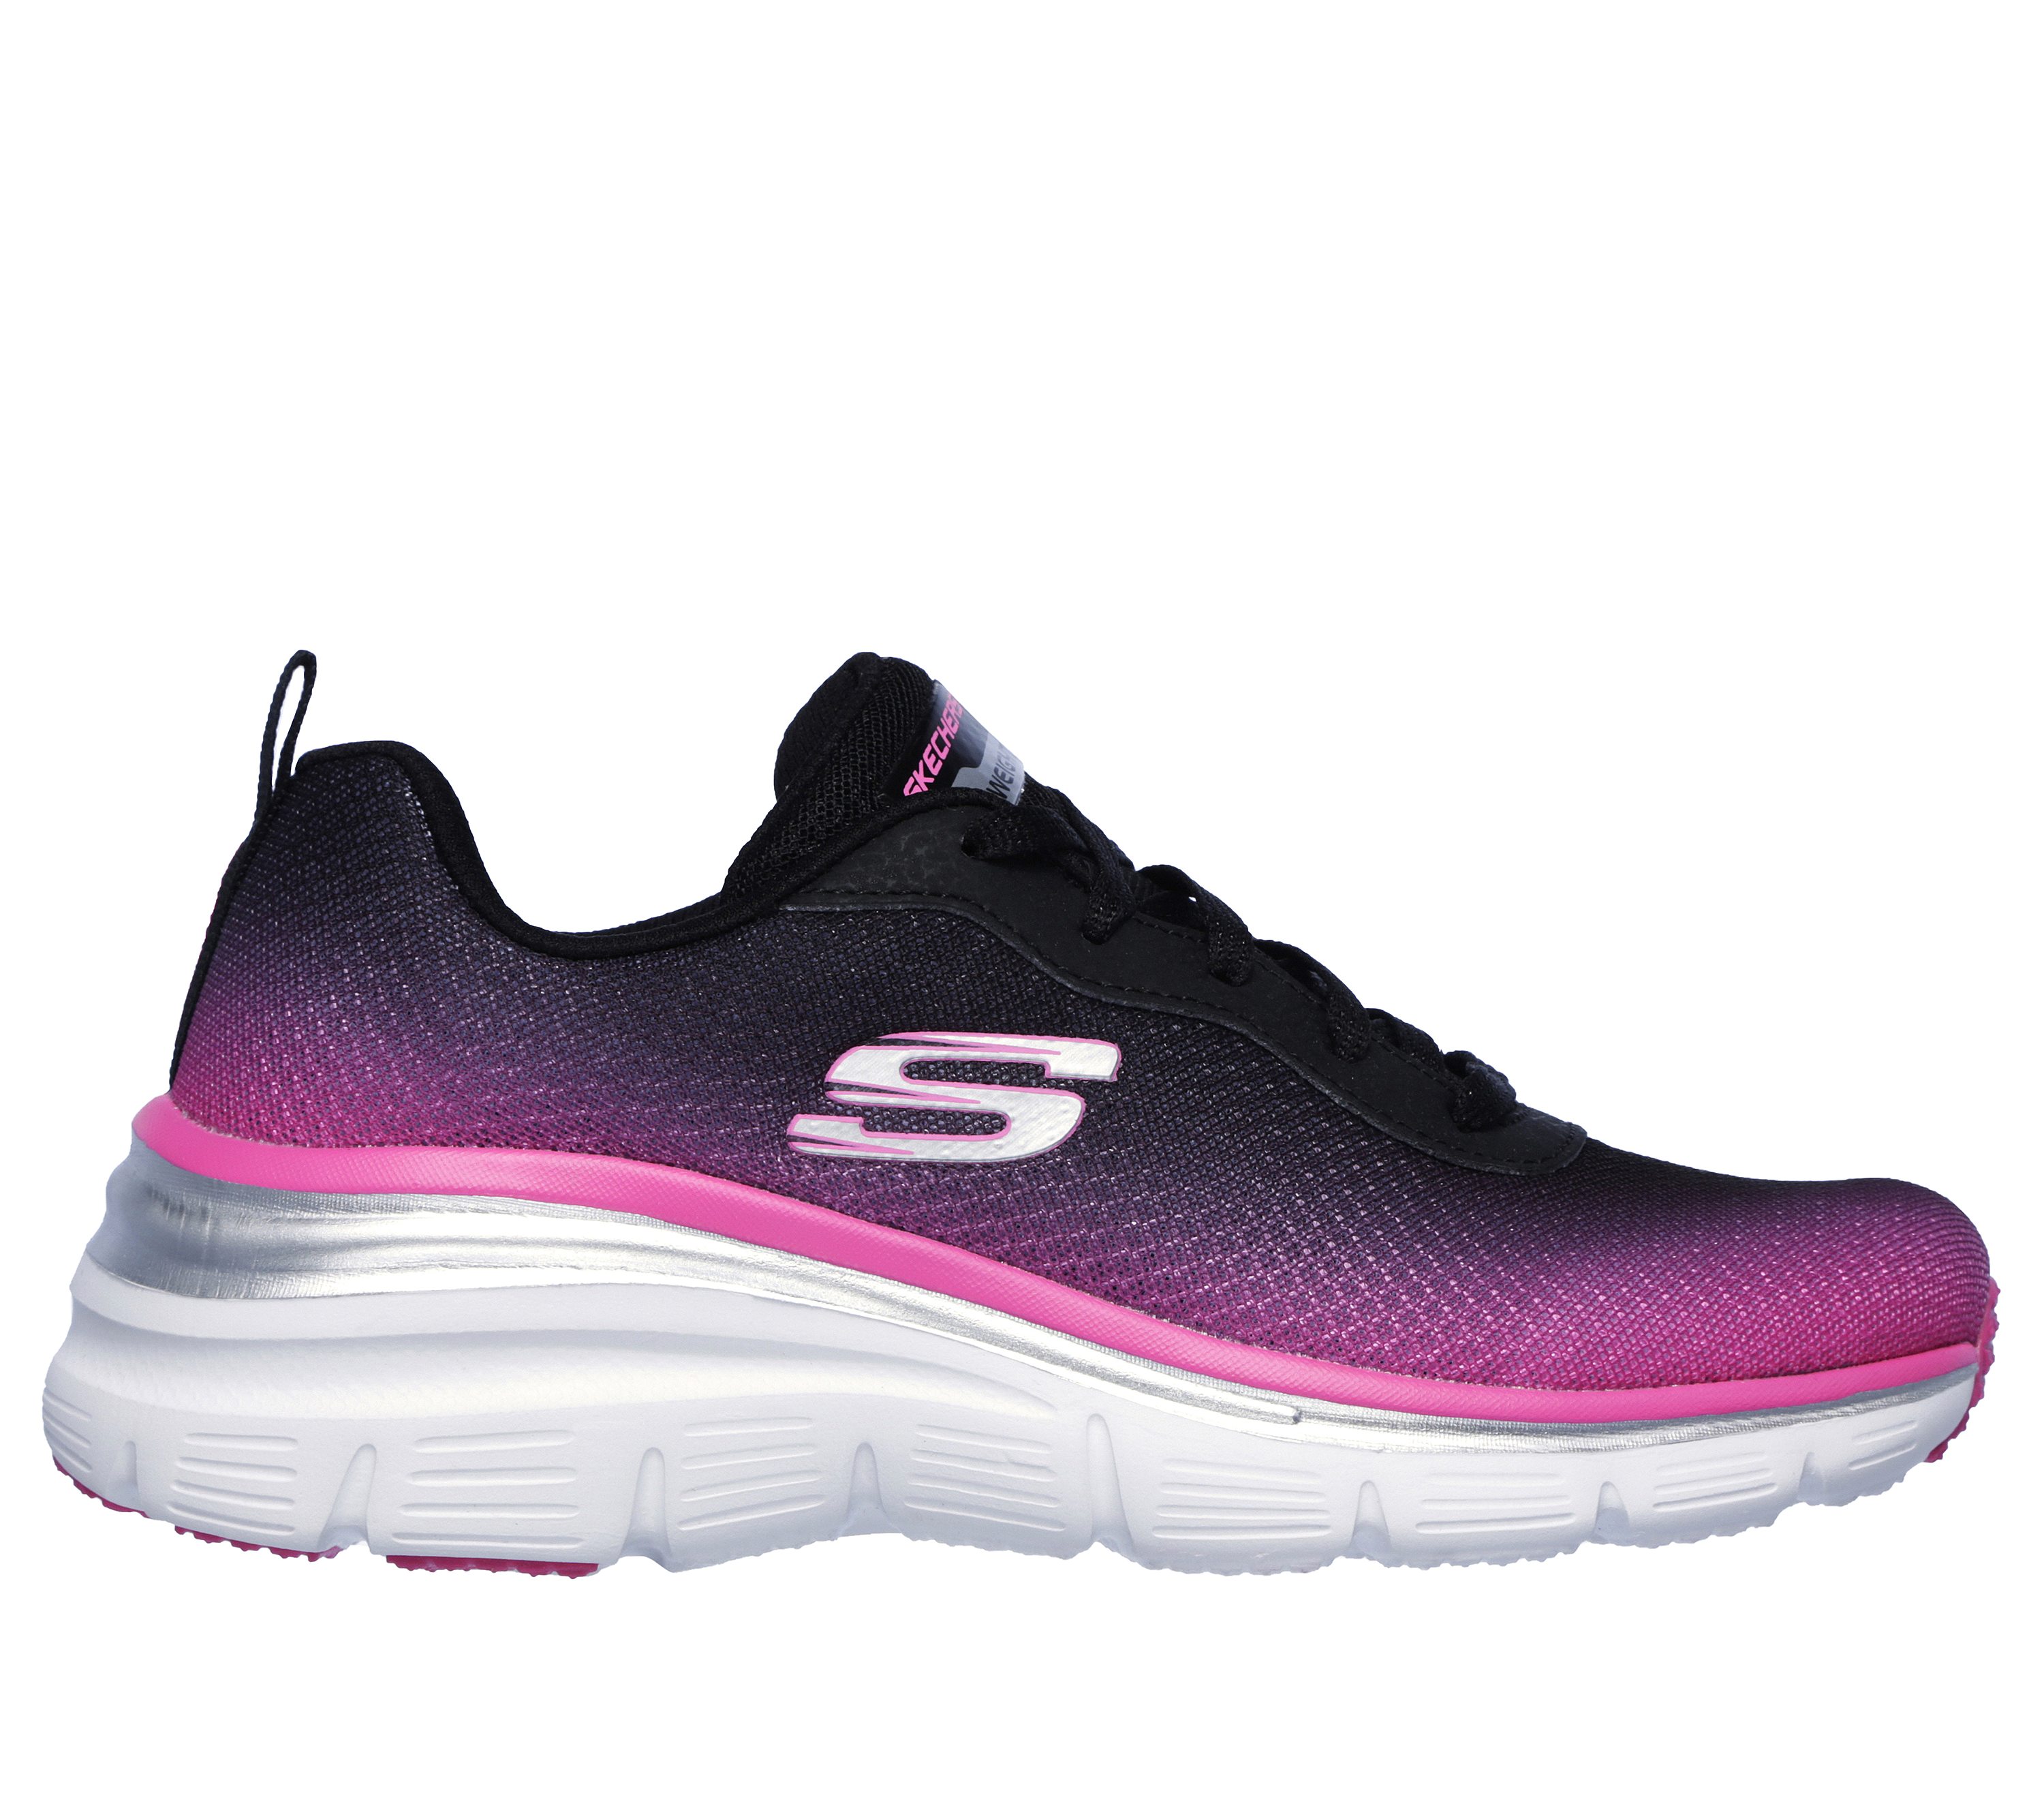 Leia Banyan Skynd dig Fashion Fit - Build Up | SKECHERS